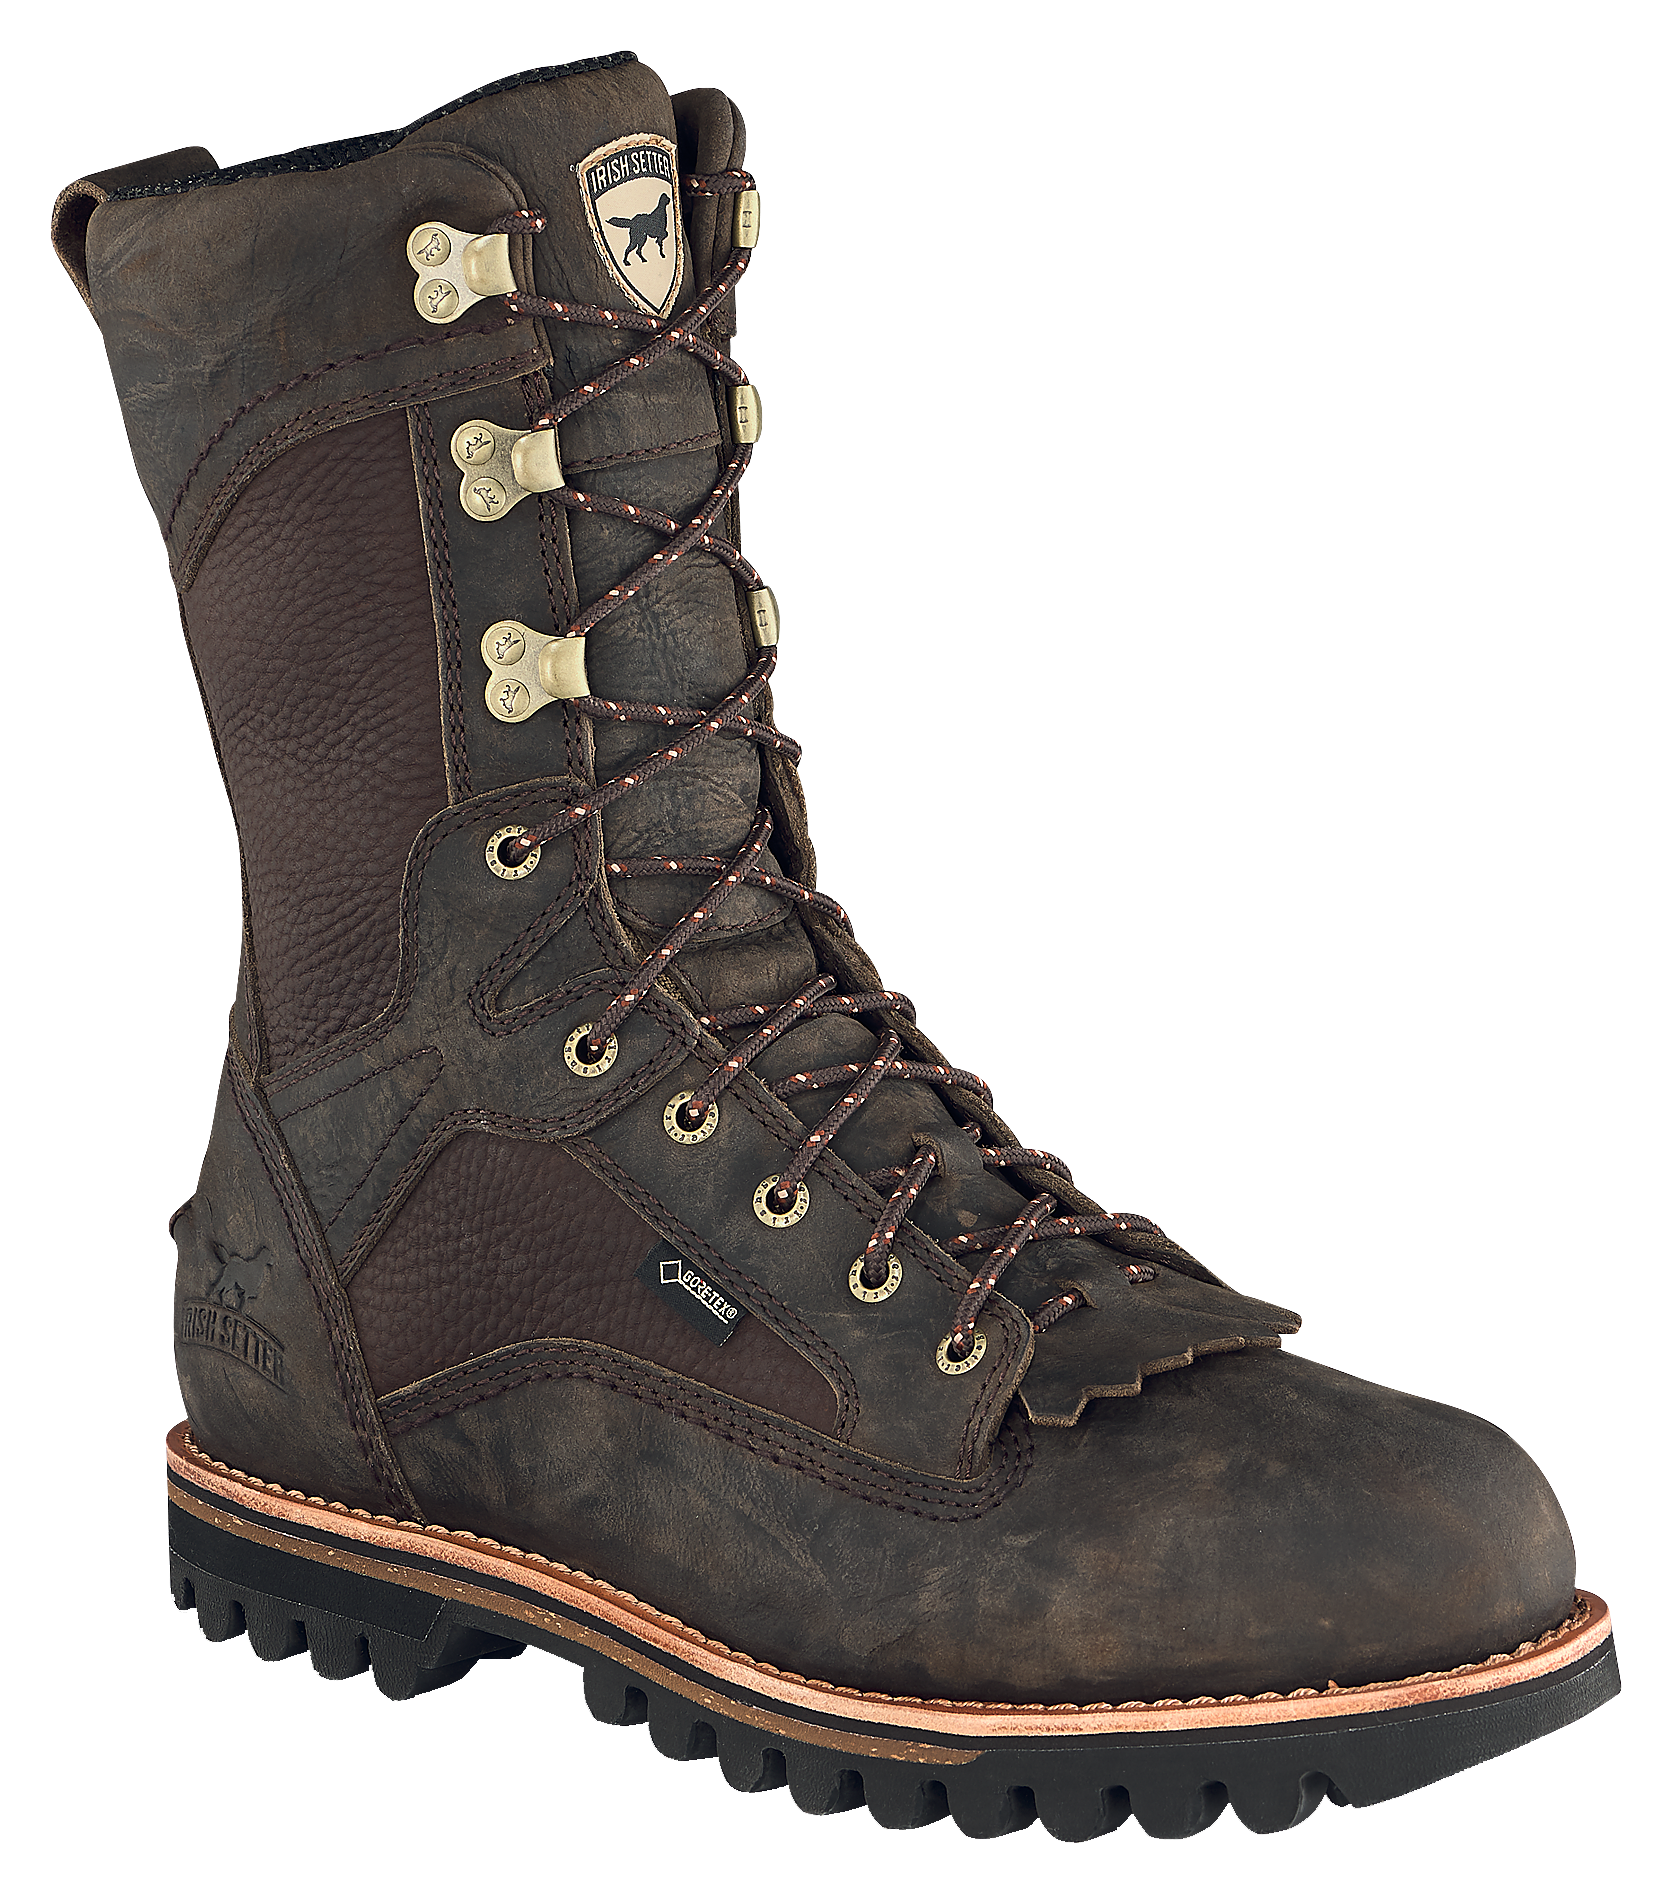 Irish Setter Elk Tracker GORE-TEX Insulated Hunting Boots for Men - Brown - 12W